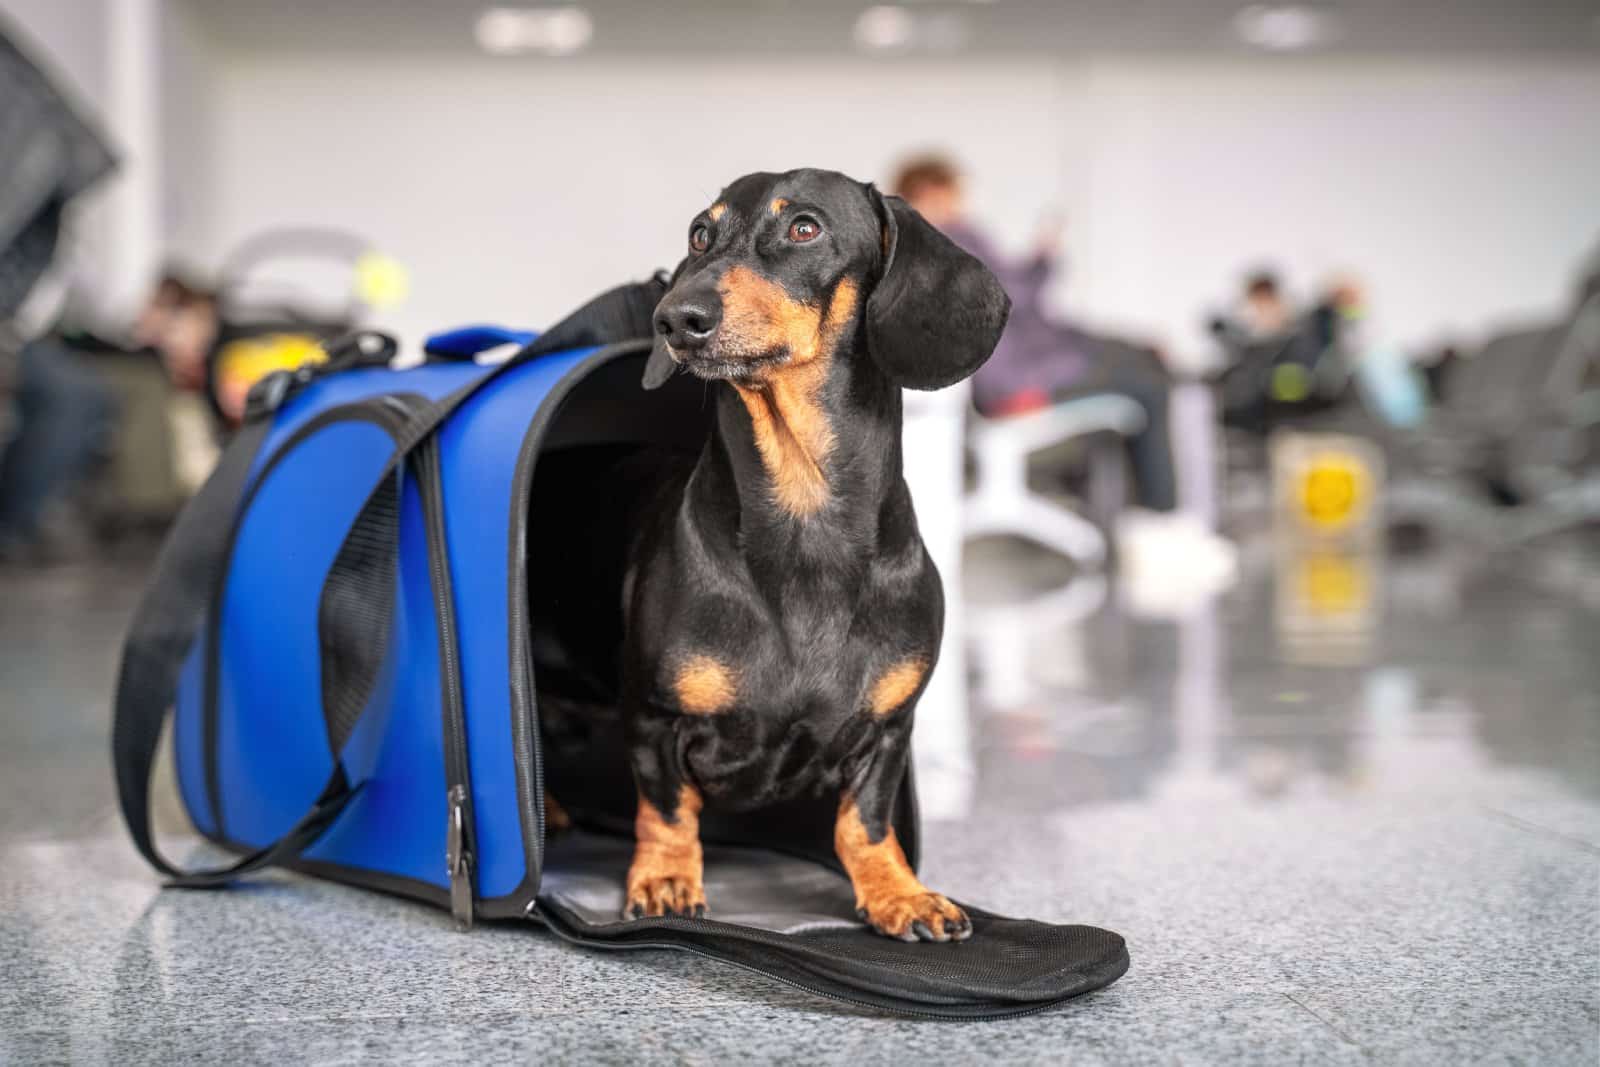 <p class="wp-caption-text">Image Credit: Shutterstock / Masarik</p>  <p><span>Find a quiet corner in airports to reduce stress. Pets can feel overwhelmed by the hustle and bustle.</span></p>